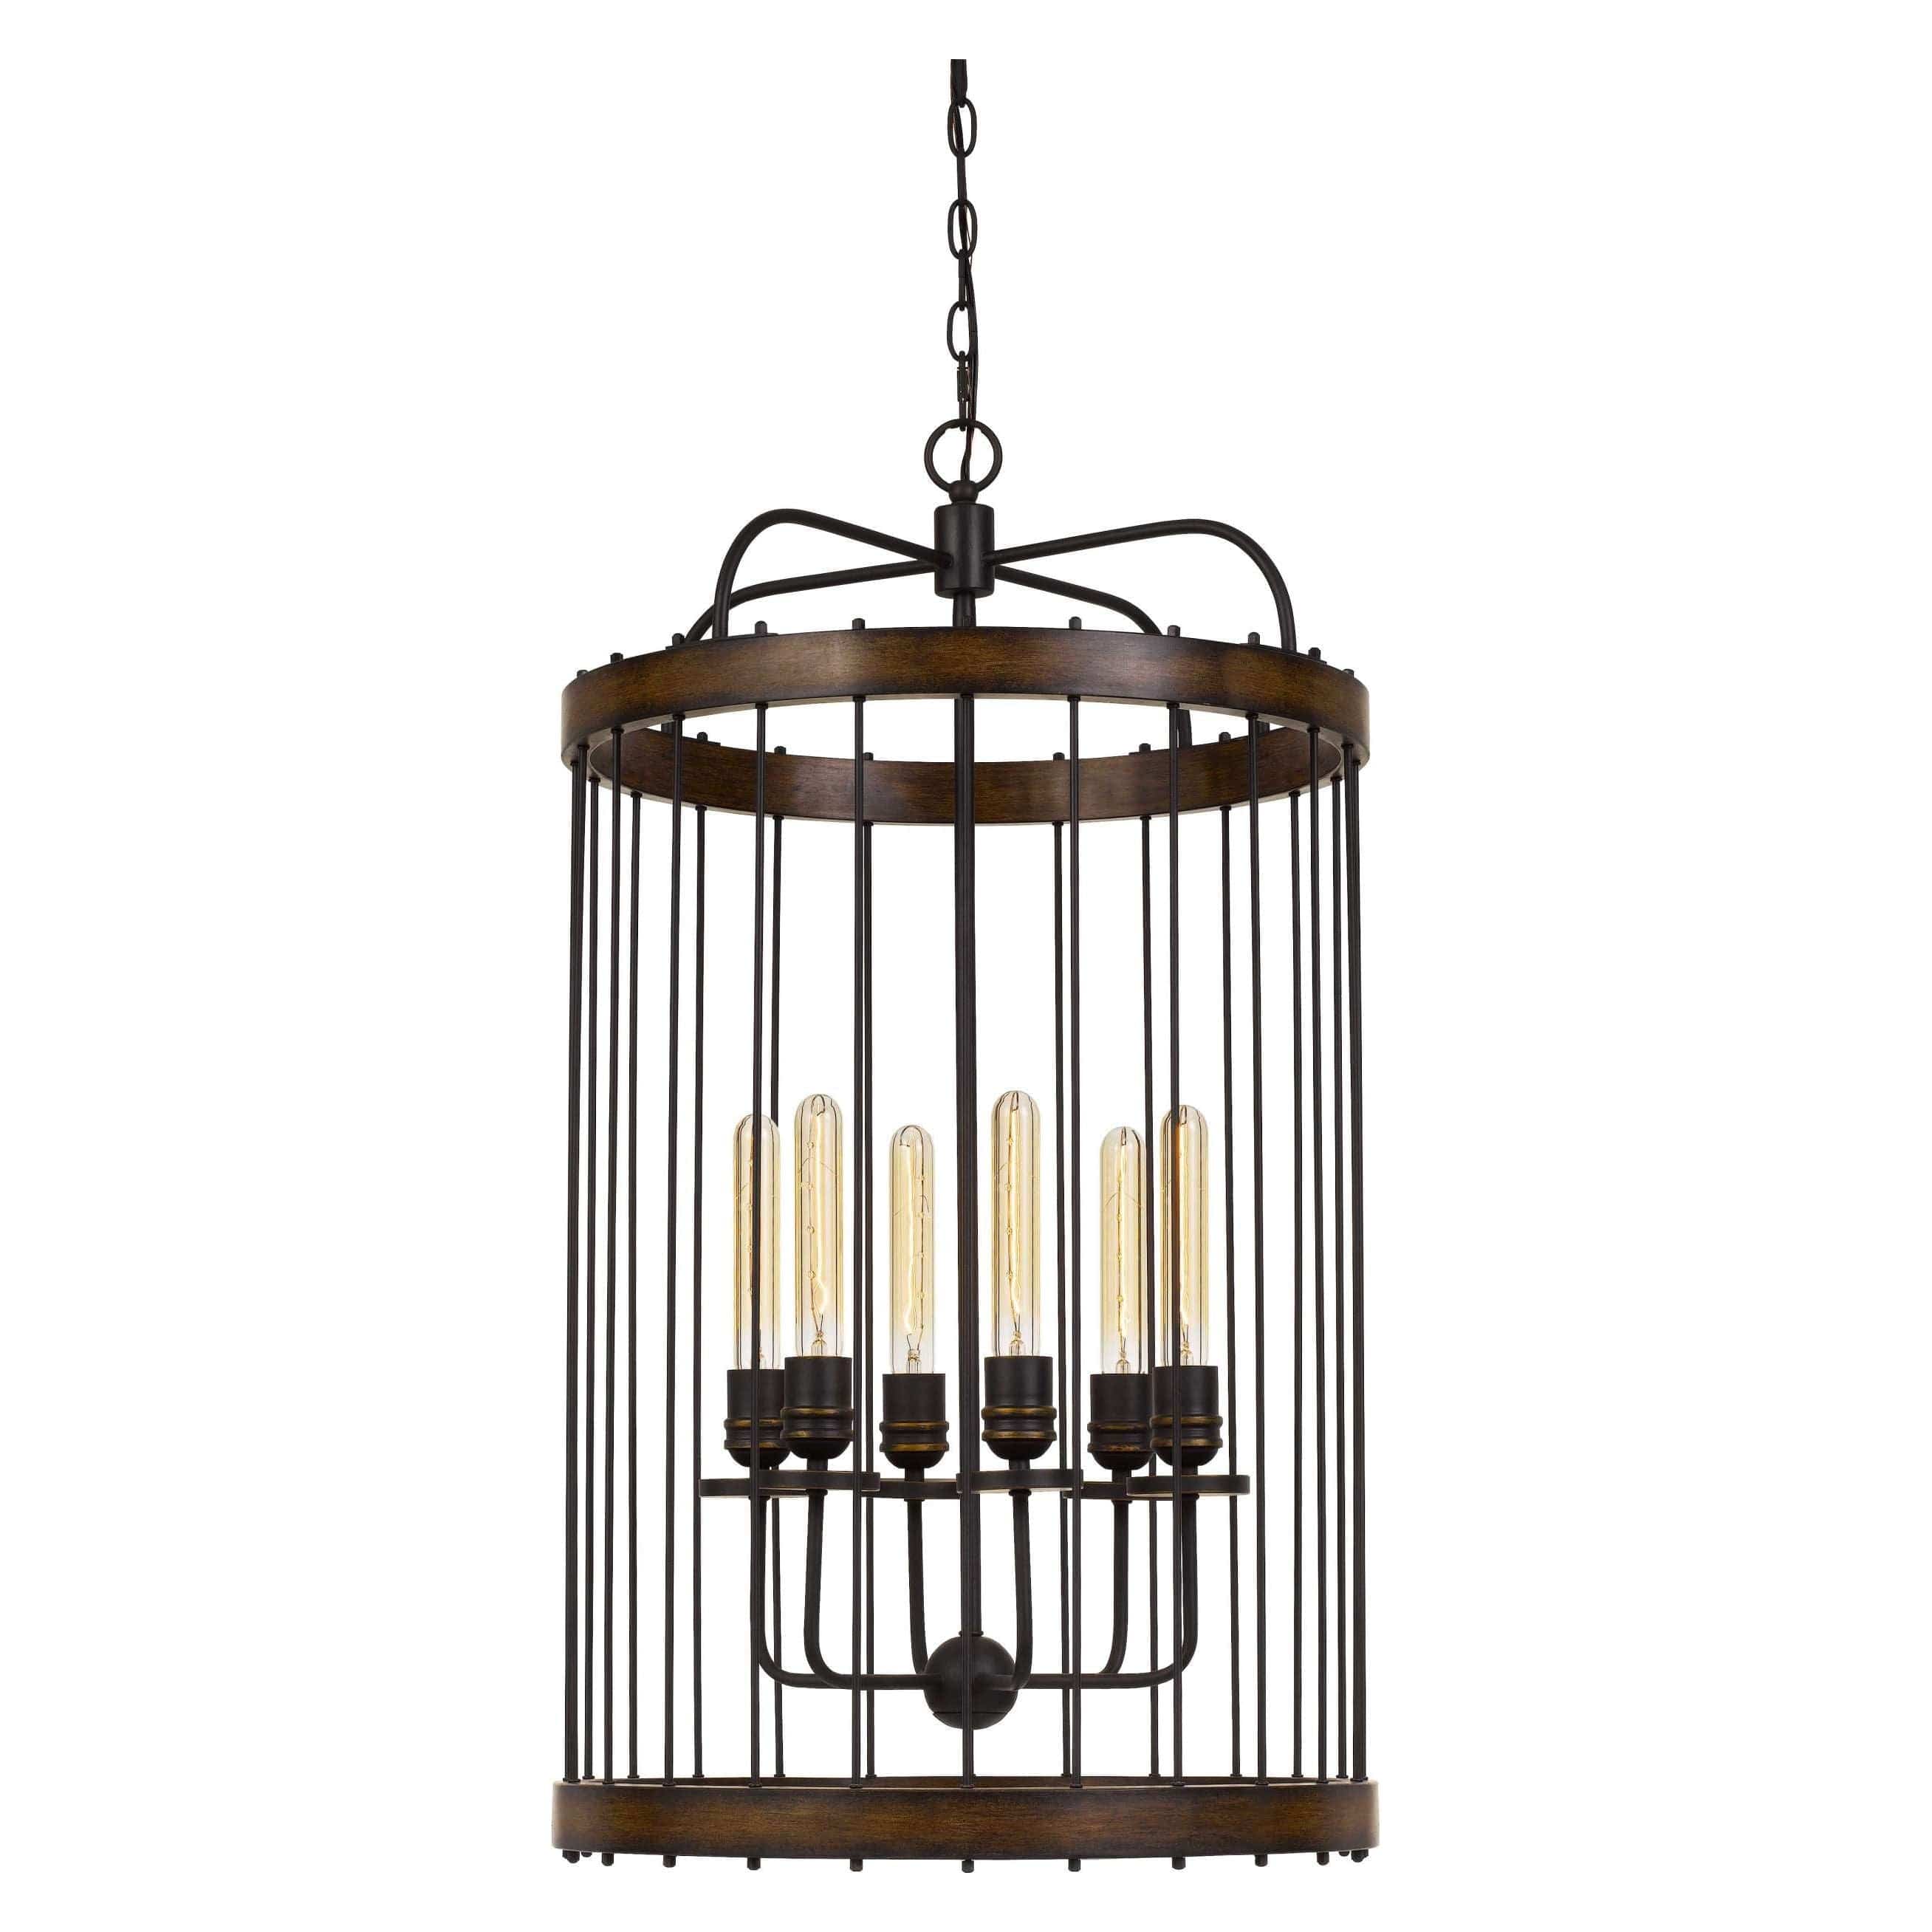 Benzara Round Metal And Wooden Frame Chandelier With Cage Design, Brown And Black By Benzara Chandeliers BM224996